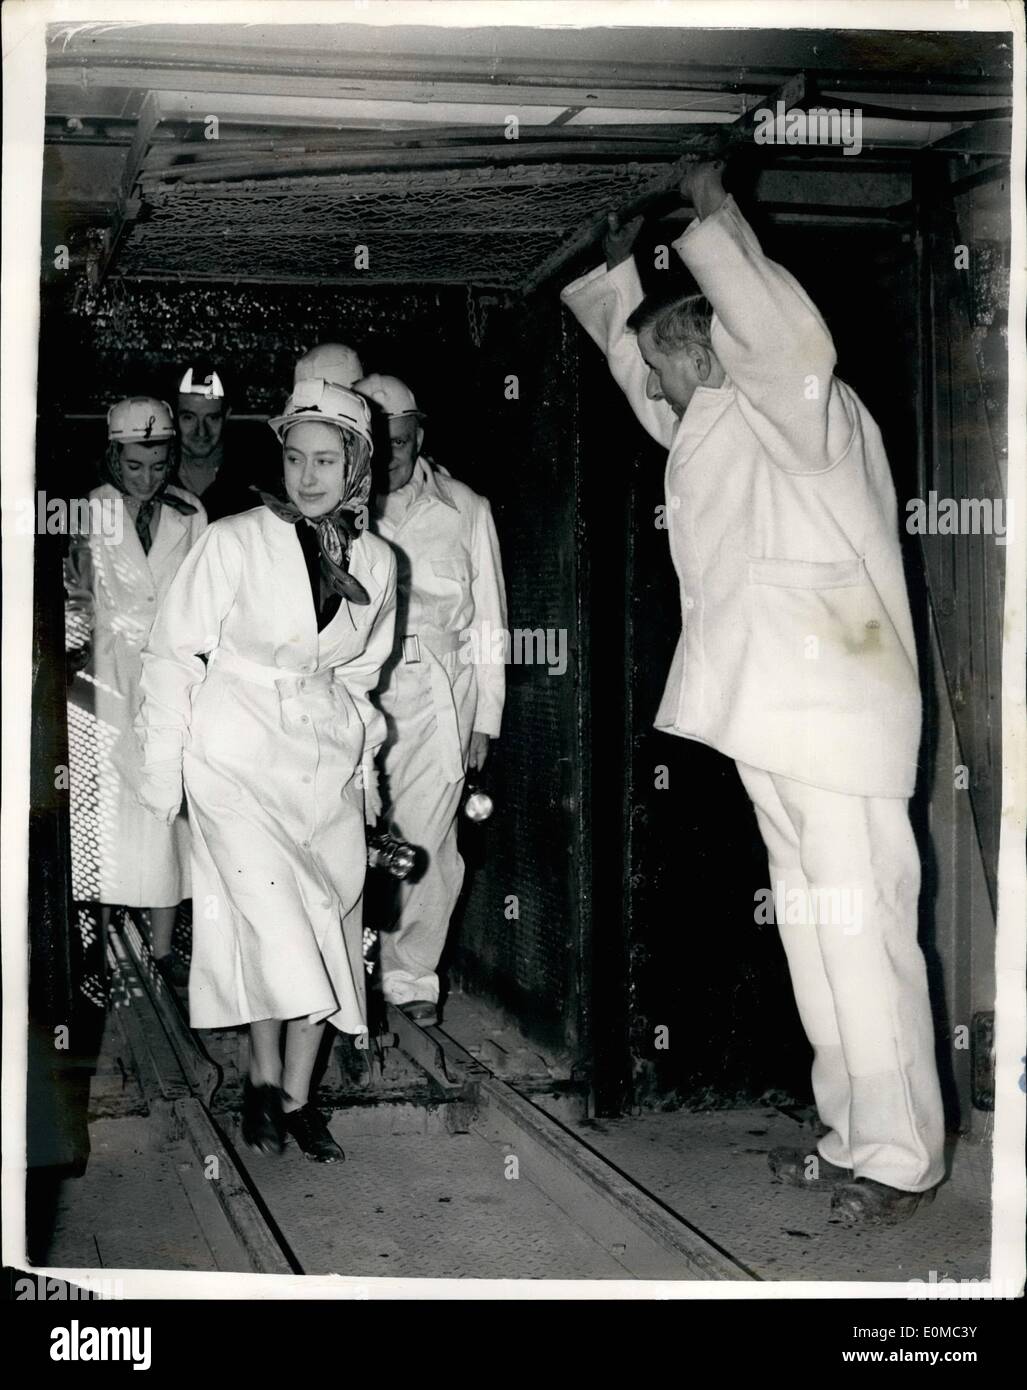 Aug. 08, 1954 - PRINCESS MARGARET GOES DOWN A MINE. Wearing a white helmet and white overalls PRINCESS MARGARET stepped into the cage of Britain's super-de-luxe colliery at Calverton, near Nottingham, yesterday. Then she descended1,158 feet down the shaft to watch the miners at work. PHOTO SHOWS: Up swings the gate of a cage-lift, held against the roof Atlas-wise by Mr. Douglas Pickering, a miner. Princess Margaret leaves the lift, white-overalled, white-helmeted, miner's lamp in hand. She had just finished an hour's to of the pit. Stock Photo